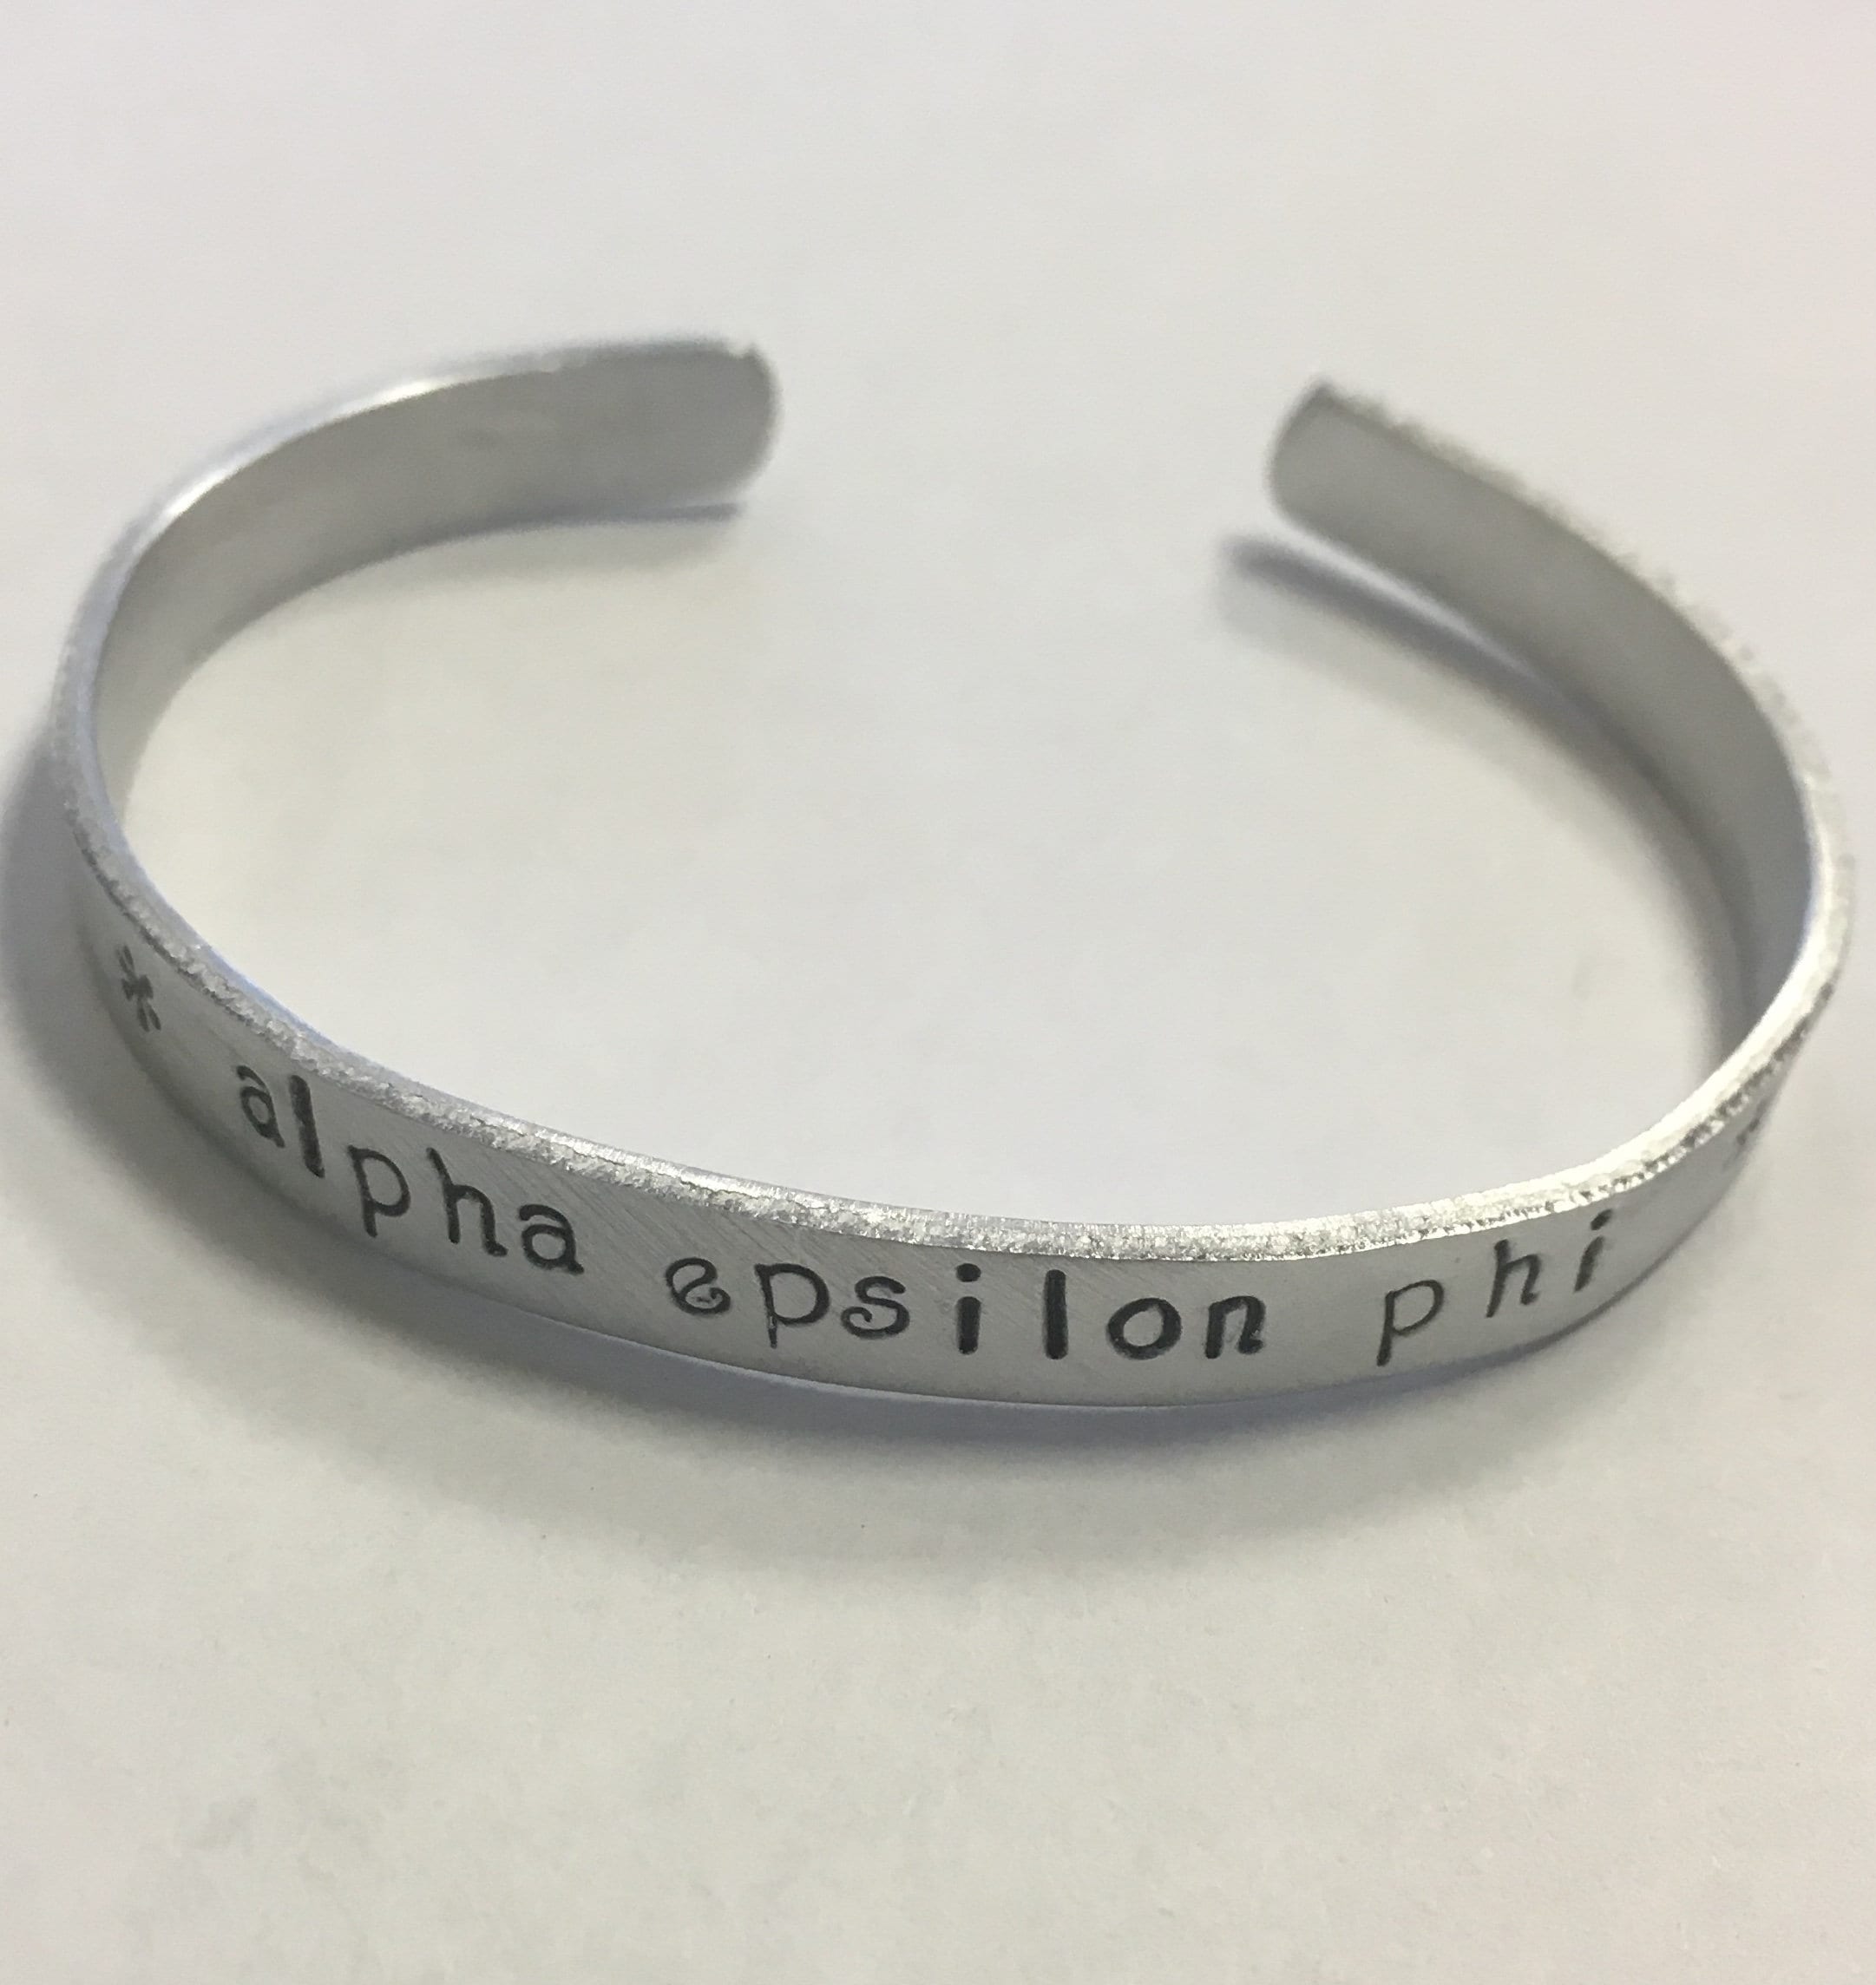 Alpha Phi Cuff Bracelet officially licensed handstamped in a whimsical font on a non tarnish aluminum cuff